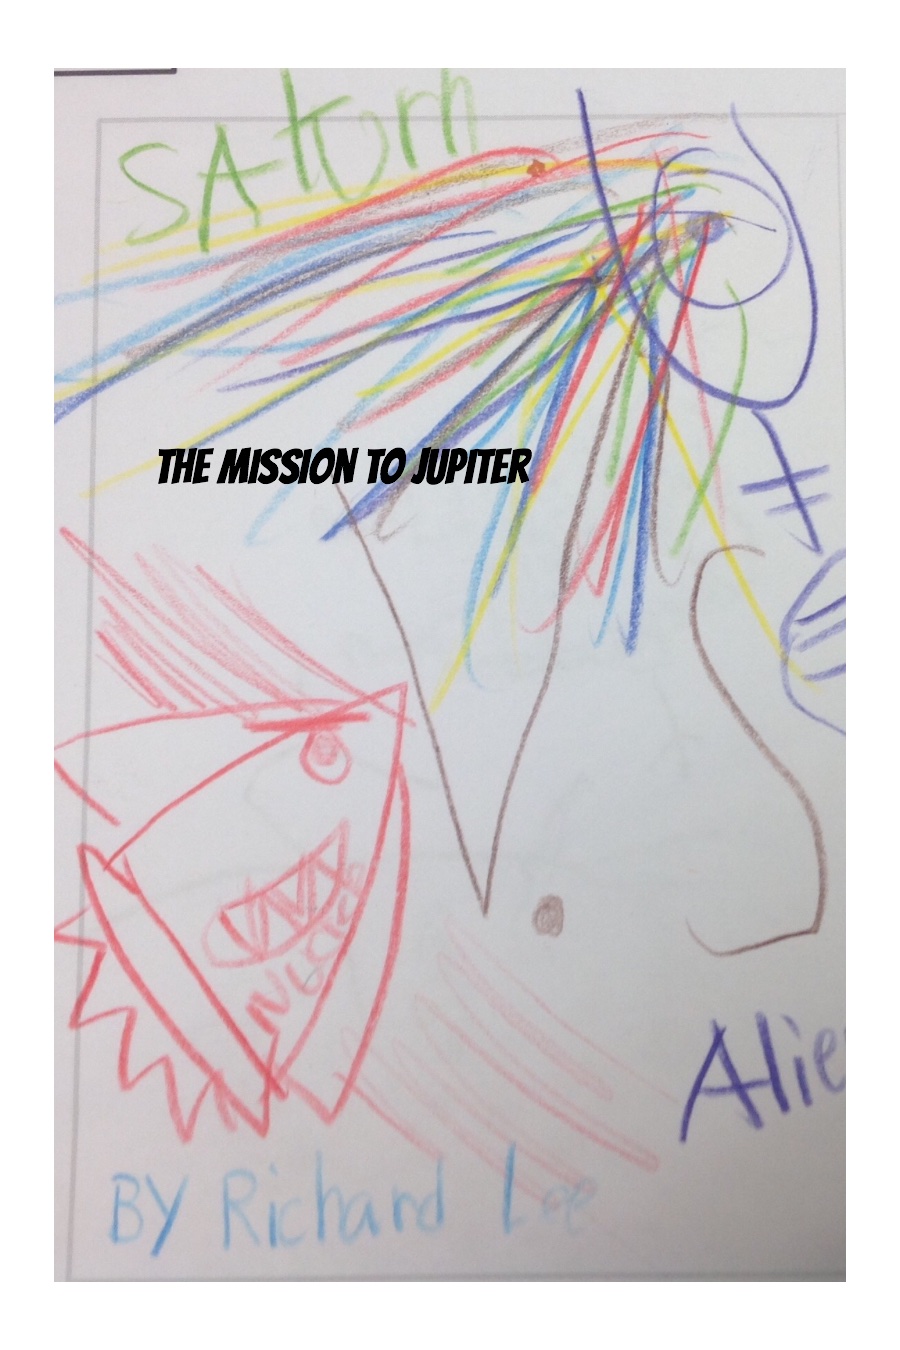 The Mission to Jupiter by Richard L (1)